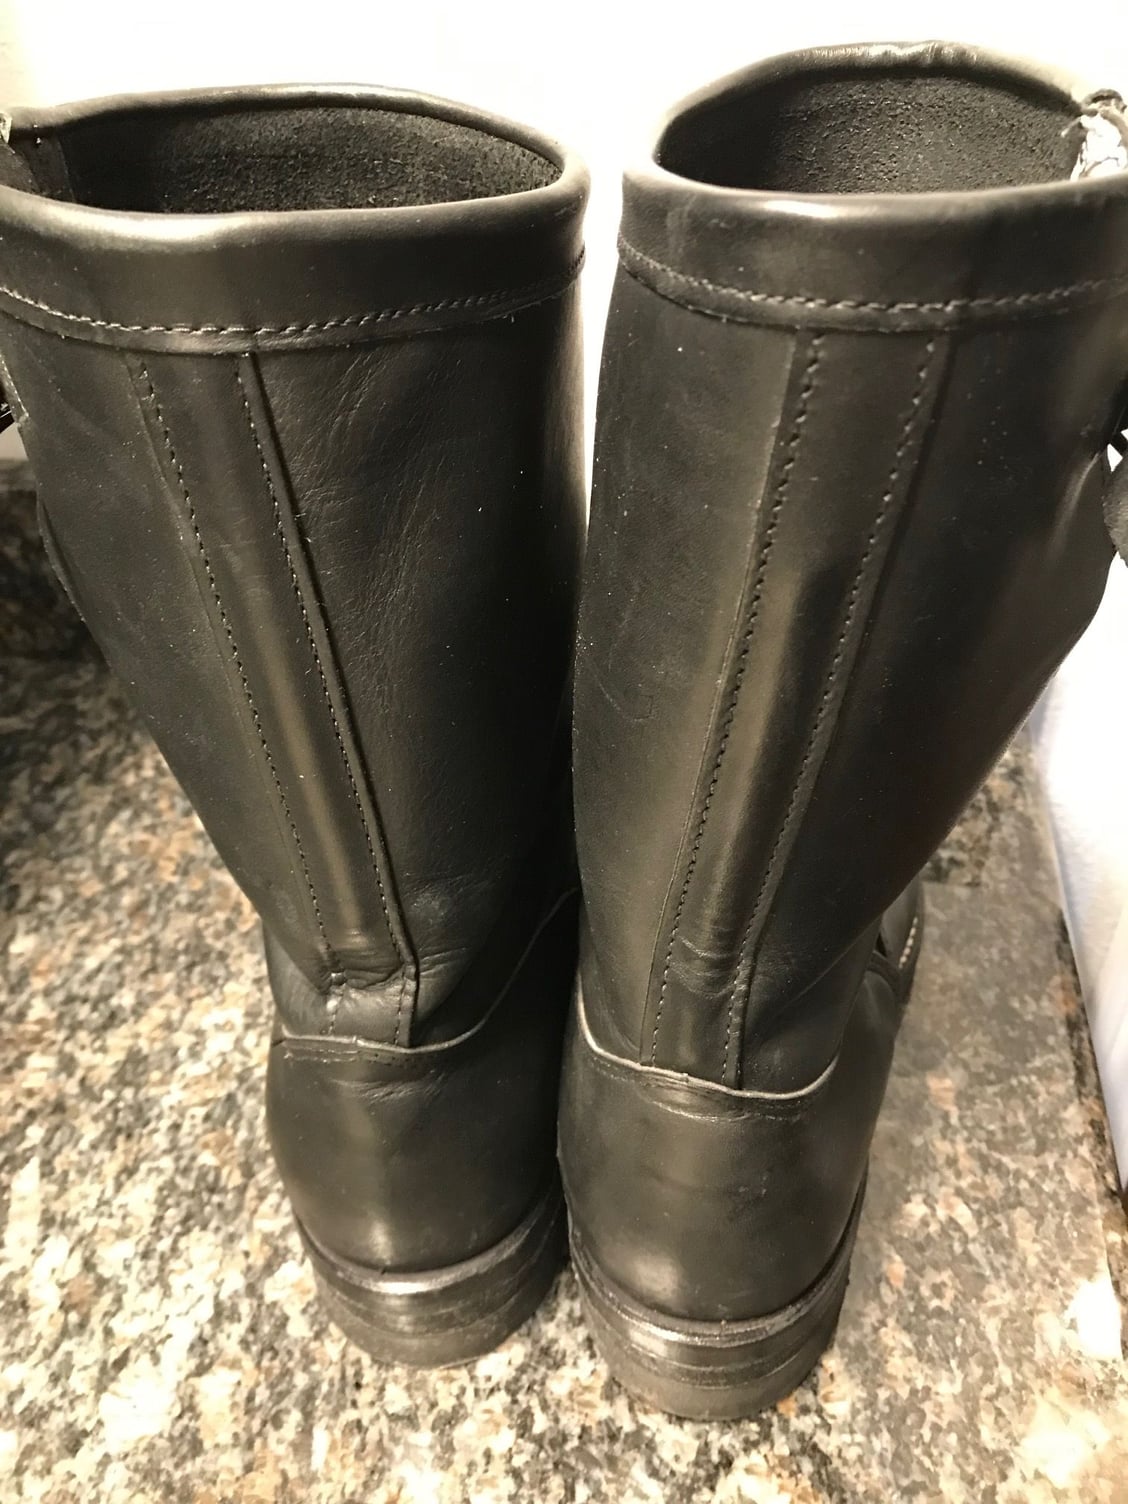 Chippewa Engineer Boots size 13D - Harley Davidson Forums